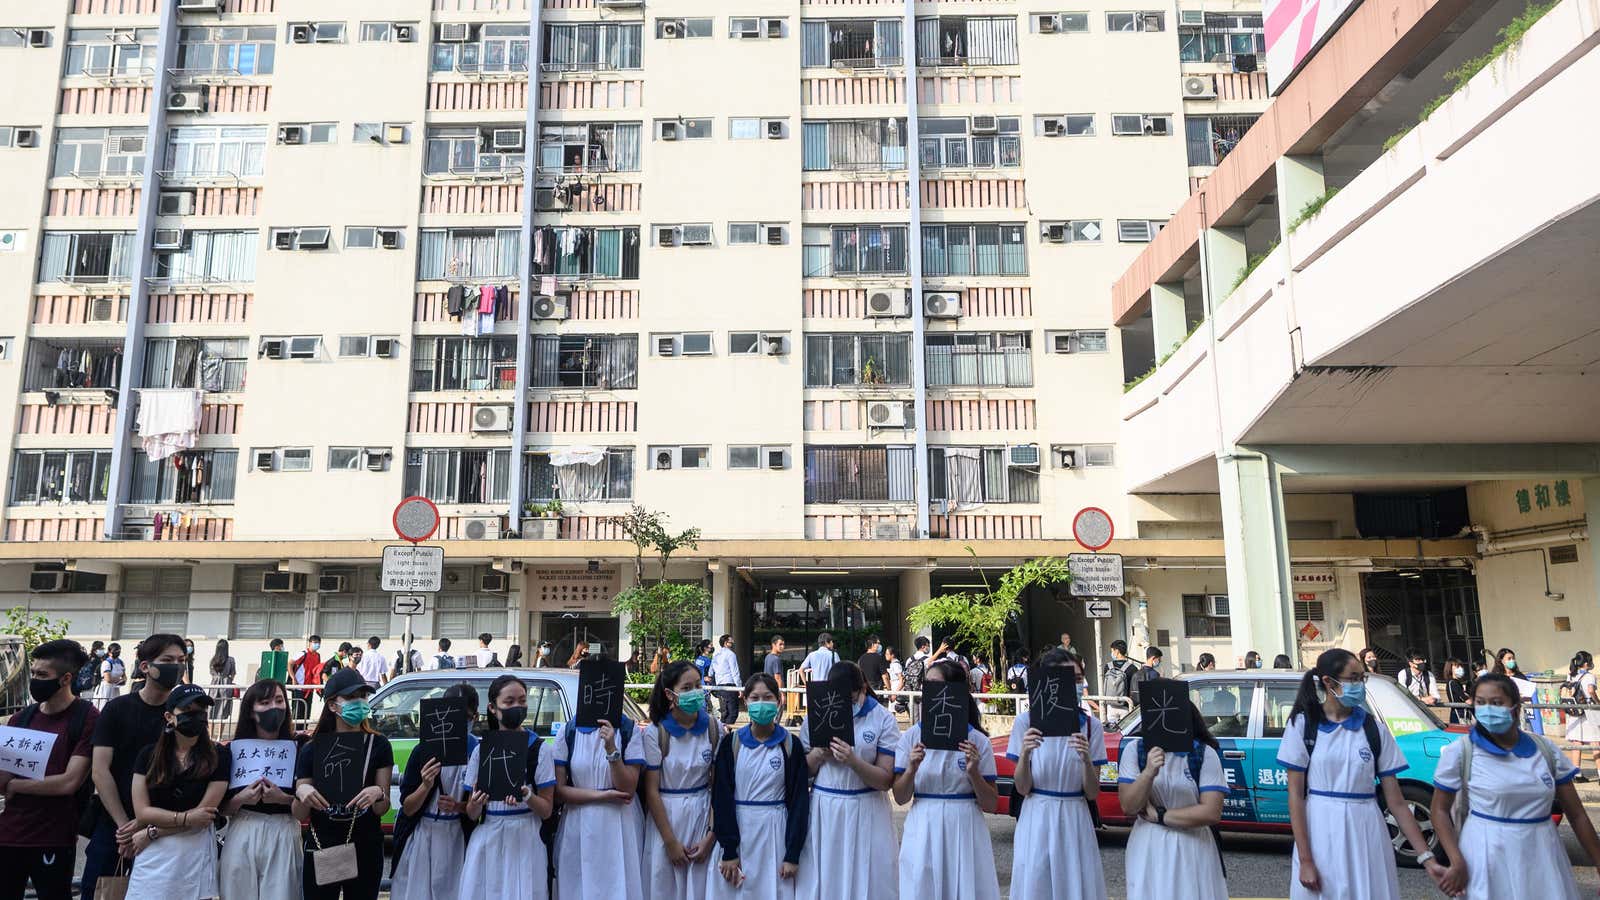 Students form a human chain in Hong Kong’s Sha Tin district.